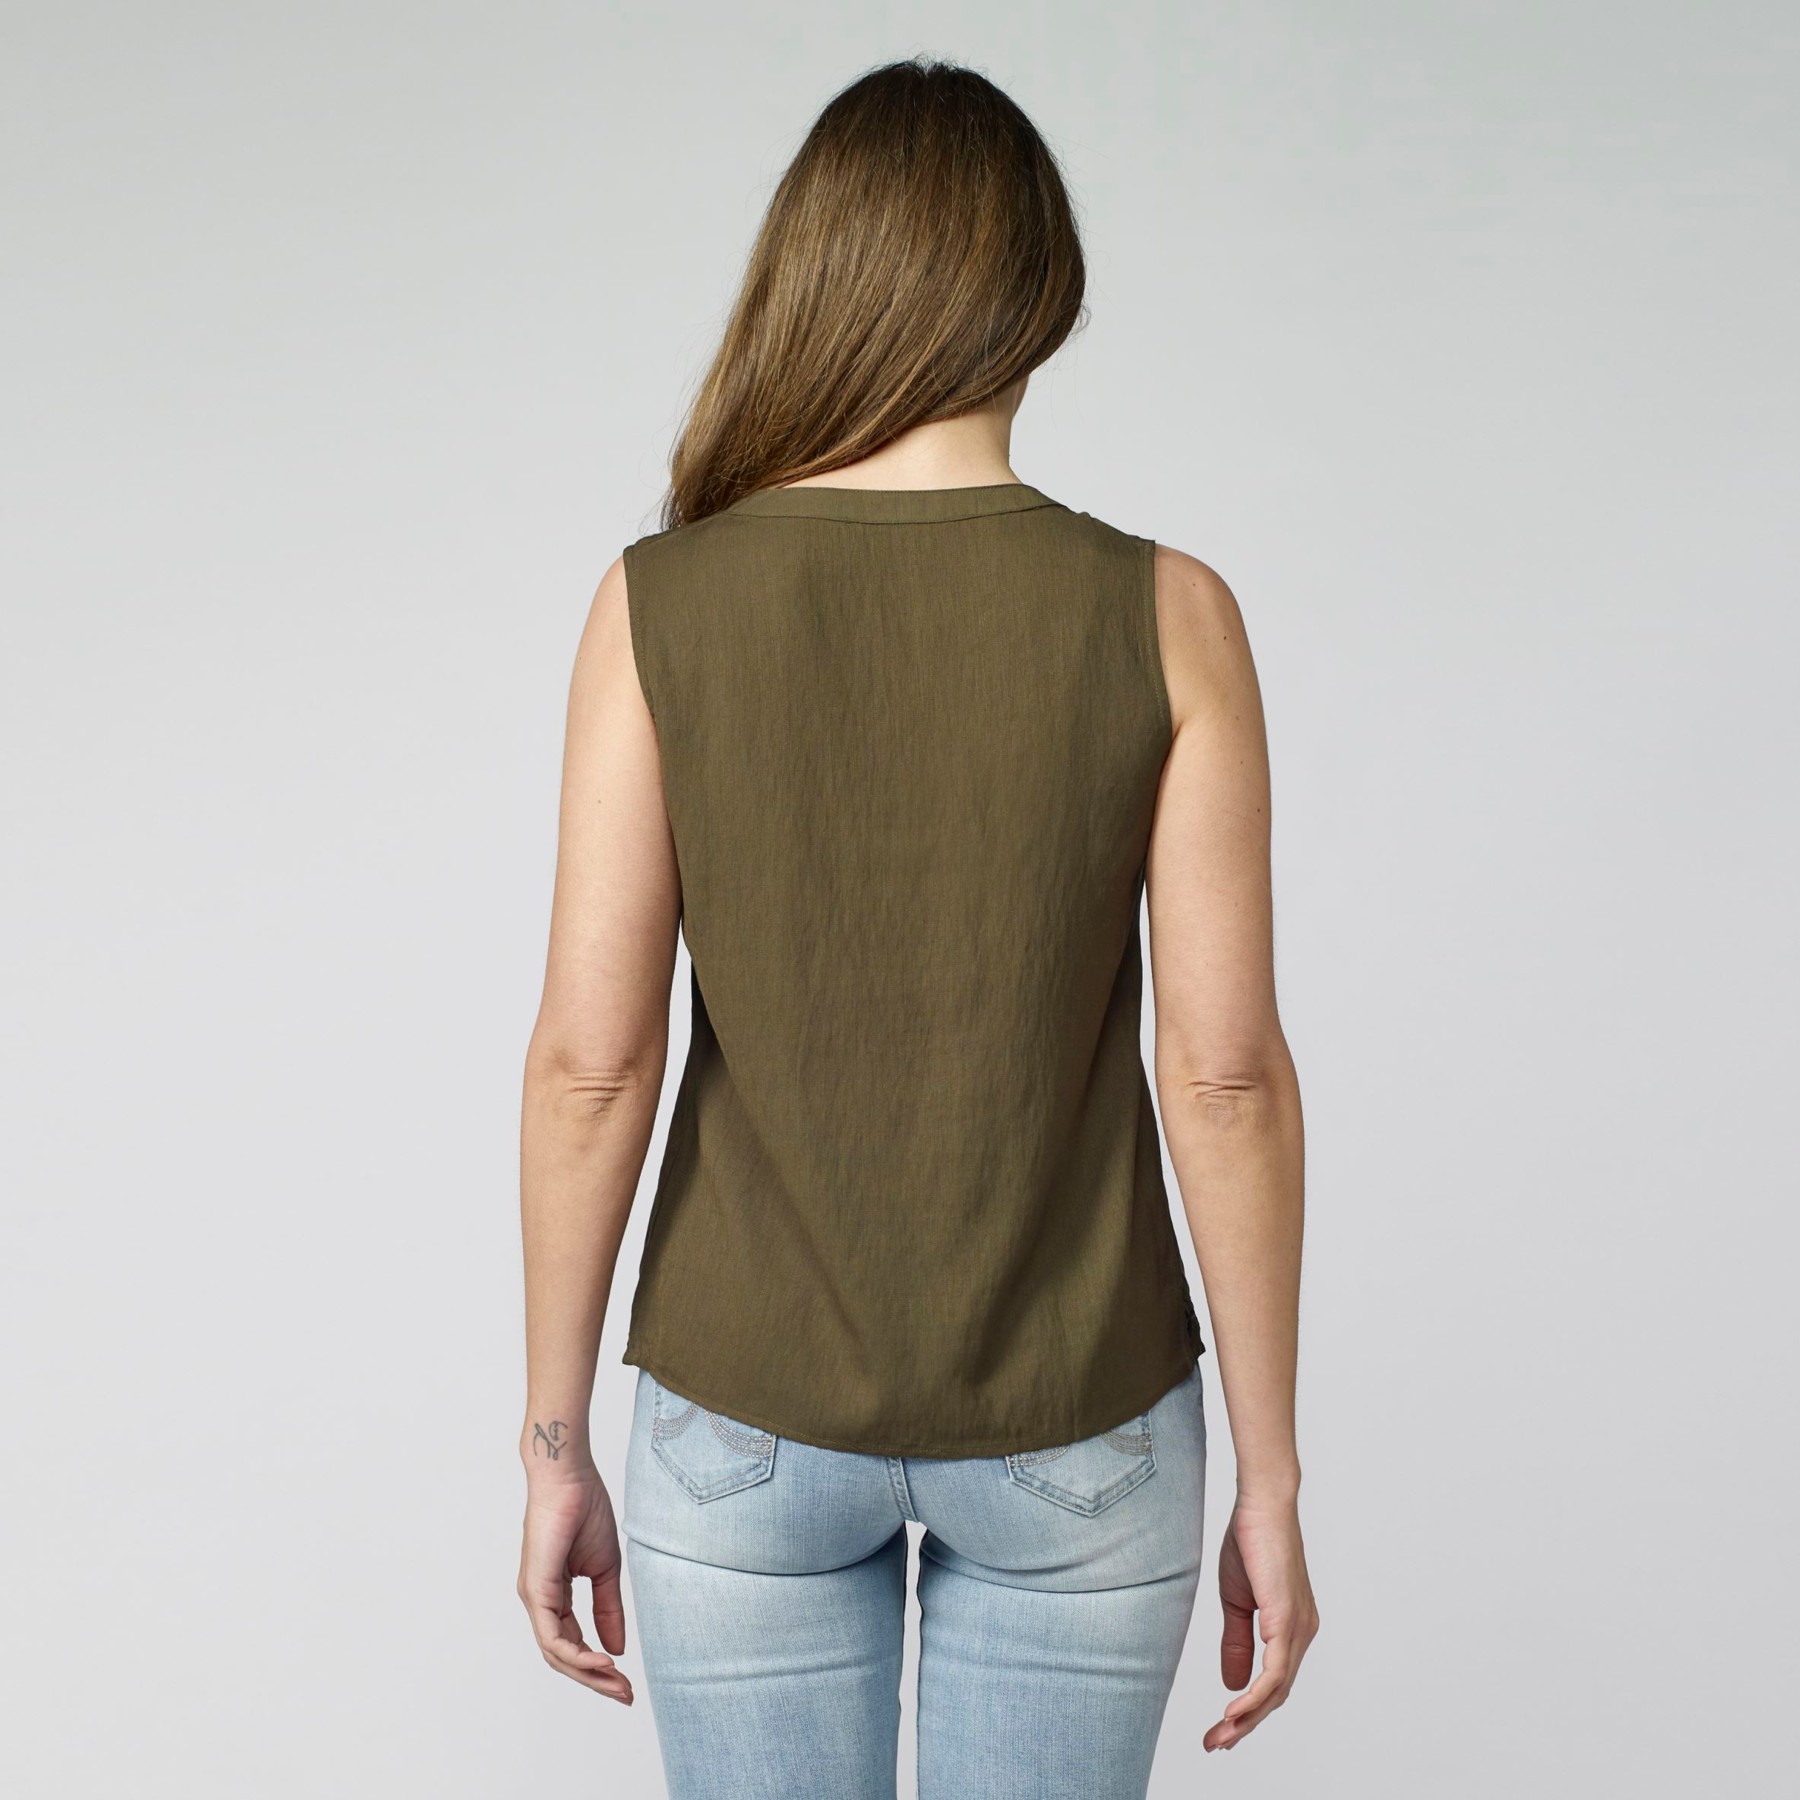 Flowing Blouse with V-neckline, Sleeveless with Embroidered Detail and Lace on the Front in Khaki Color for Women 3